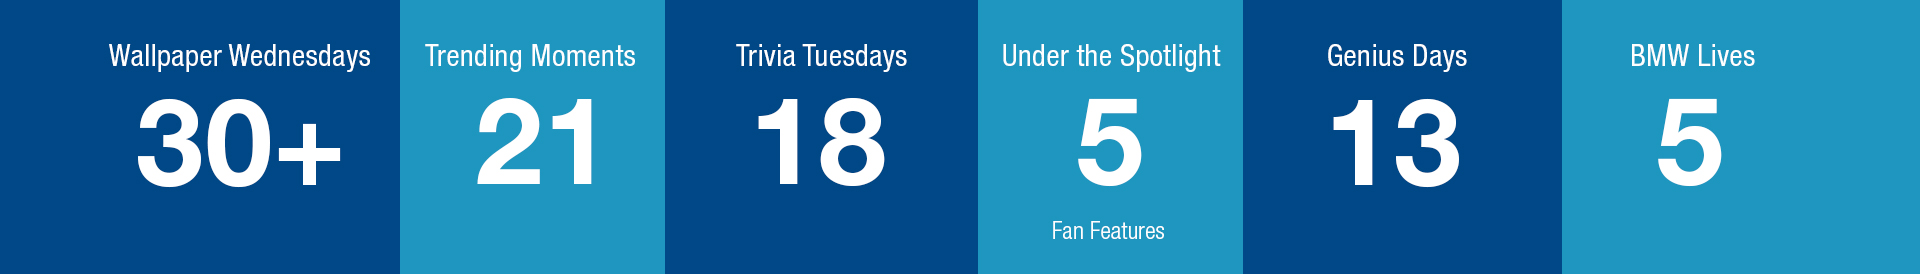 Stats: 30+ Wallpaper Wednesdays, 18 Trivia Tuesdays, 13 Genius Days, 5 Under the Spotlight fan features, 21 trending moments and 5 BMW Lives